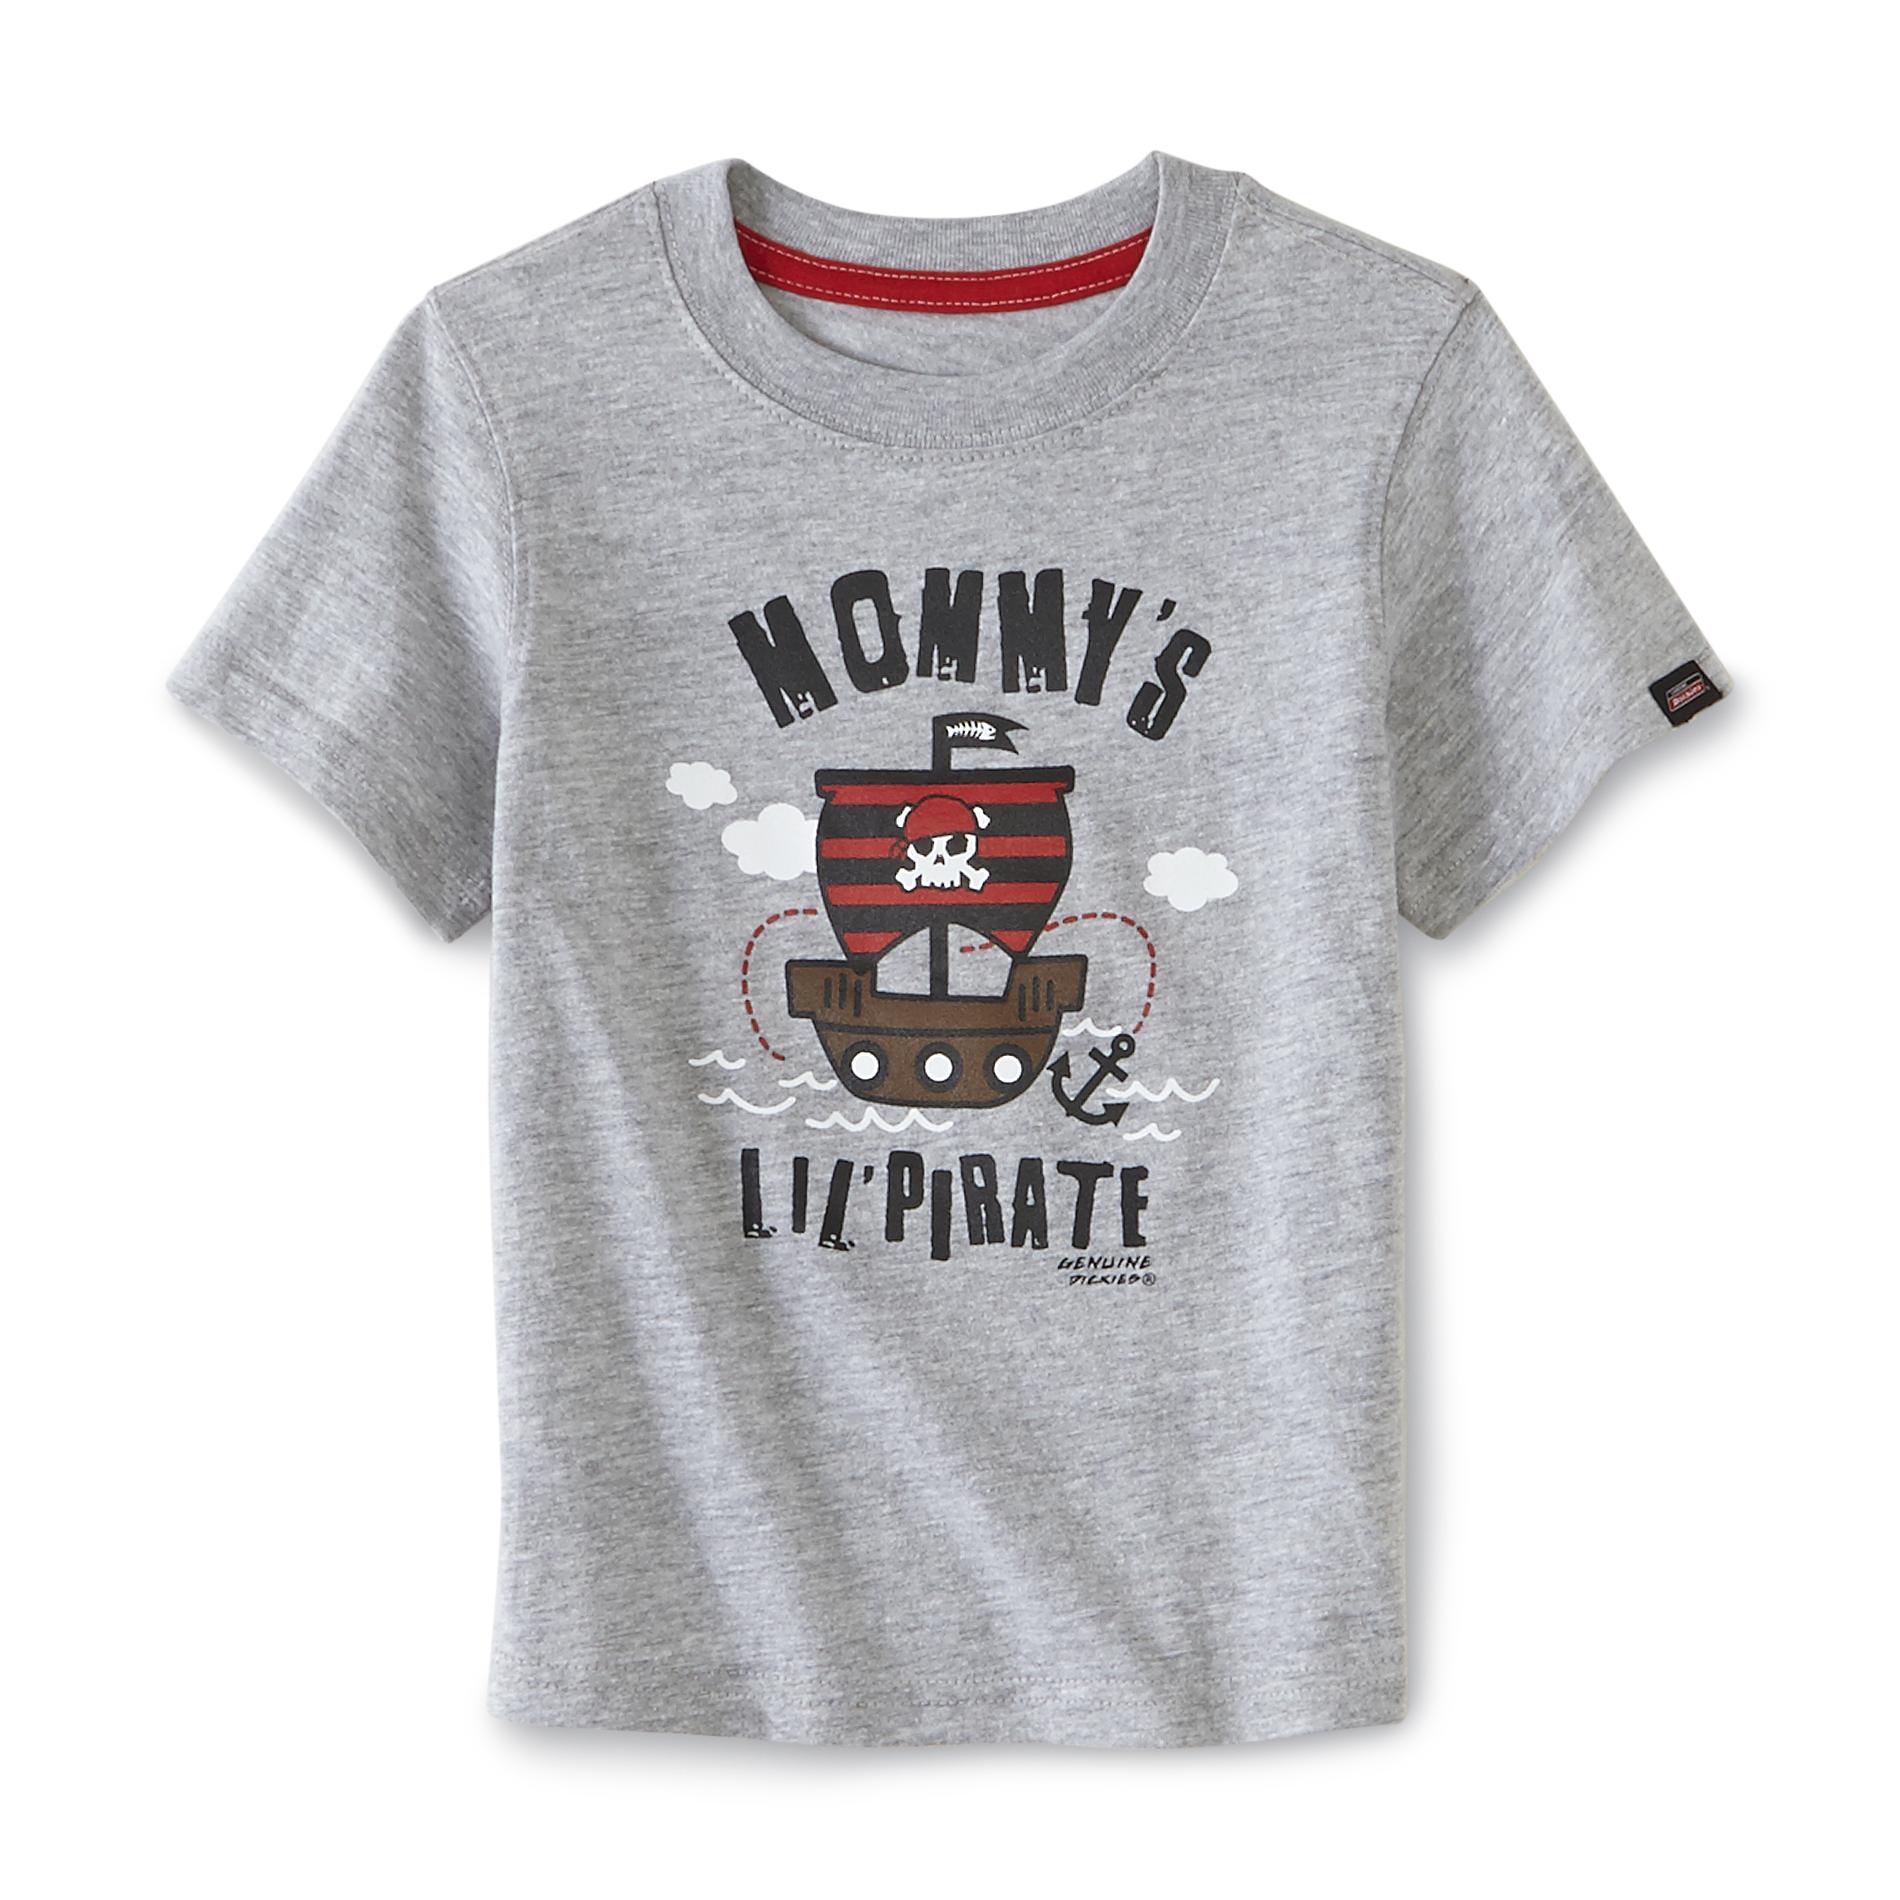 Dickies Infant & Toddler Boy's Graphic T-Shirt - Mommy's Lil' Pirate